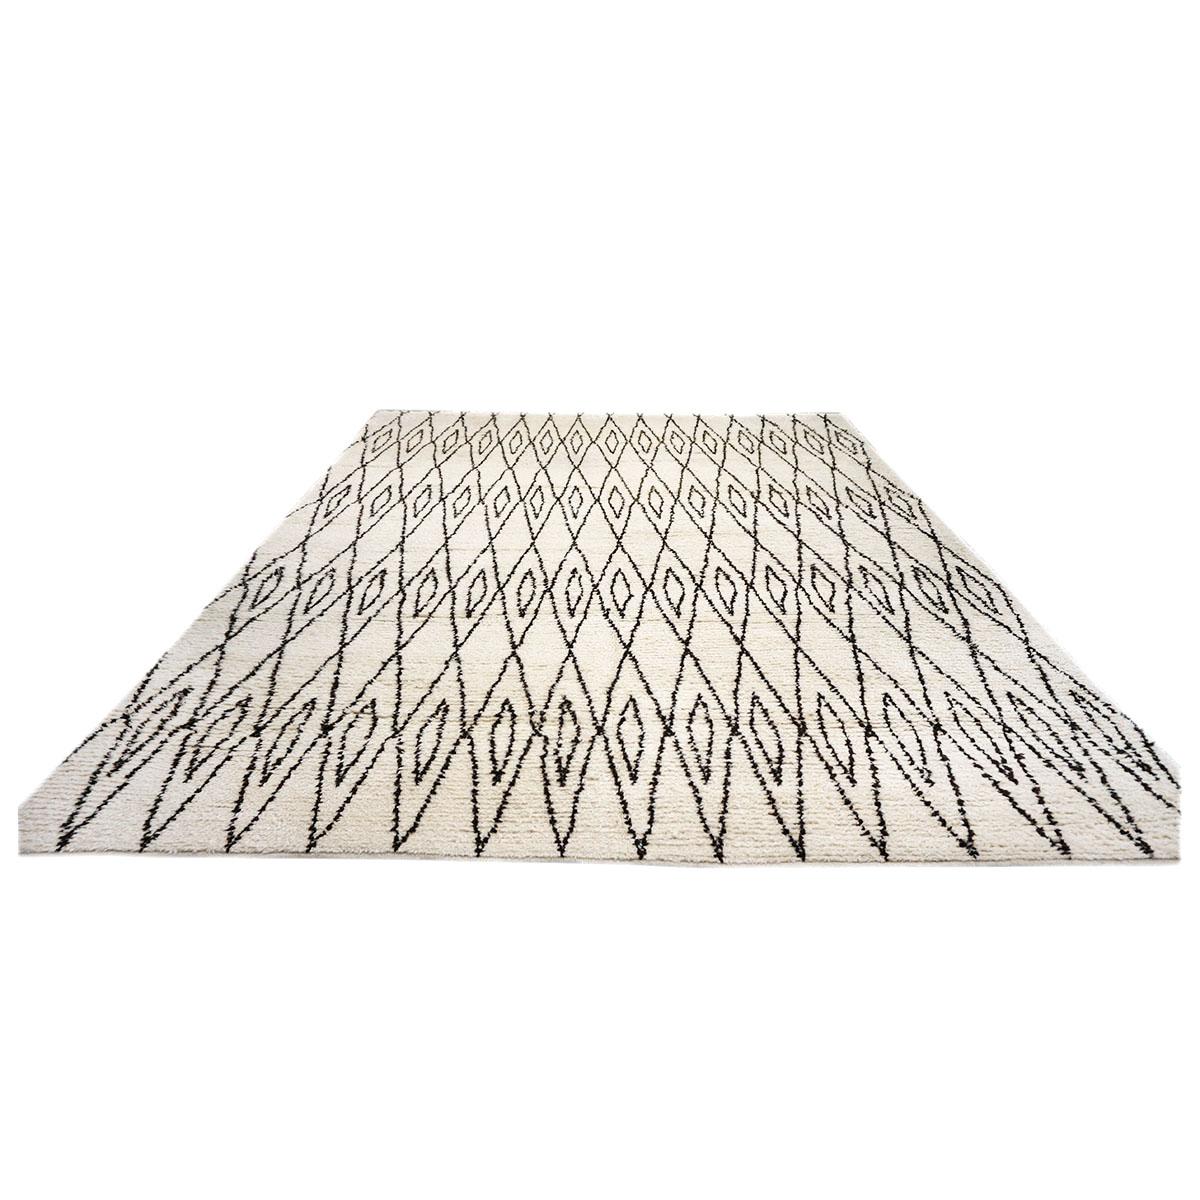 Ashly Fine Rugs presents a Vintage Beni Ourain Modern Morrocan 12x18 Ivory & Dark Brown Handmade Area Rug. Beni Ourain rugs are some of the most popular and sought-after types of Moroccan rugs. These pieces are known for their minimalist, geometric